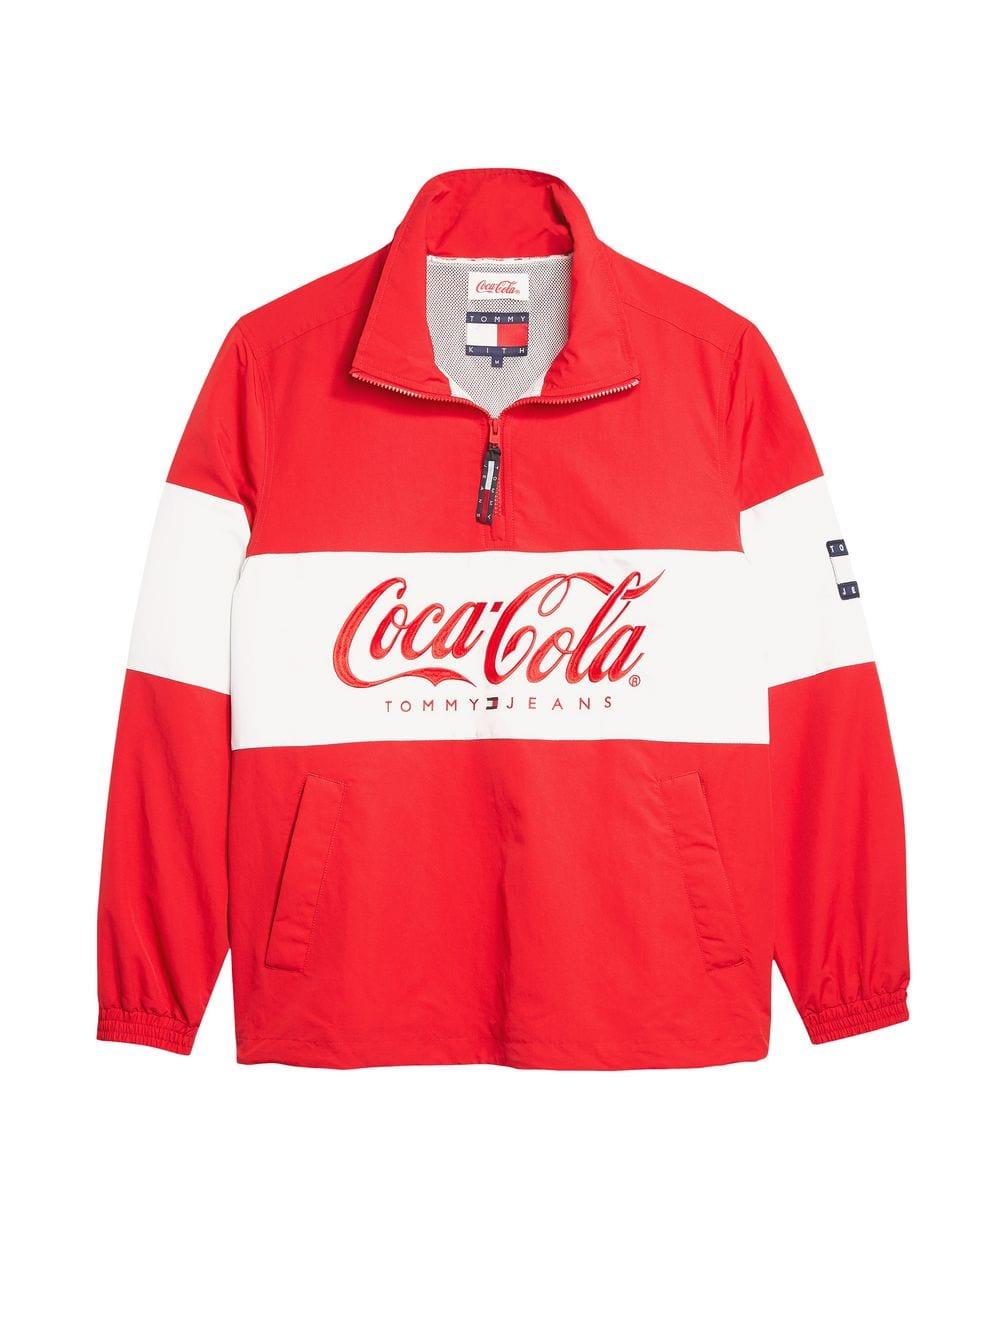 tommy hilfiger and coca cola